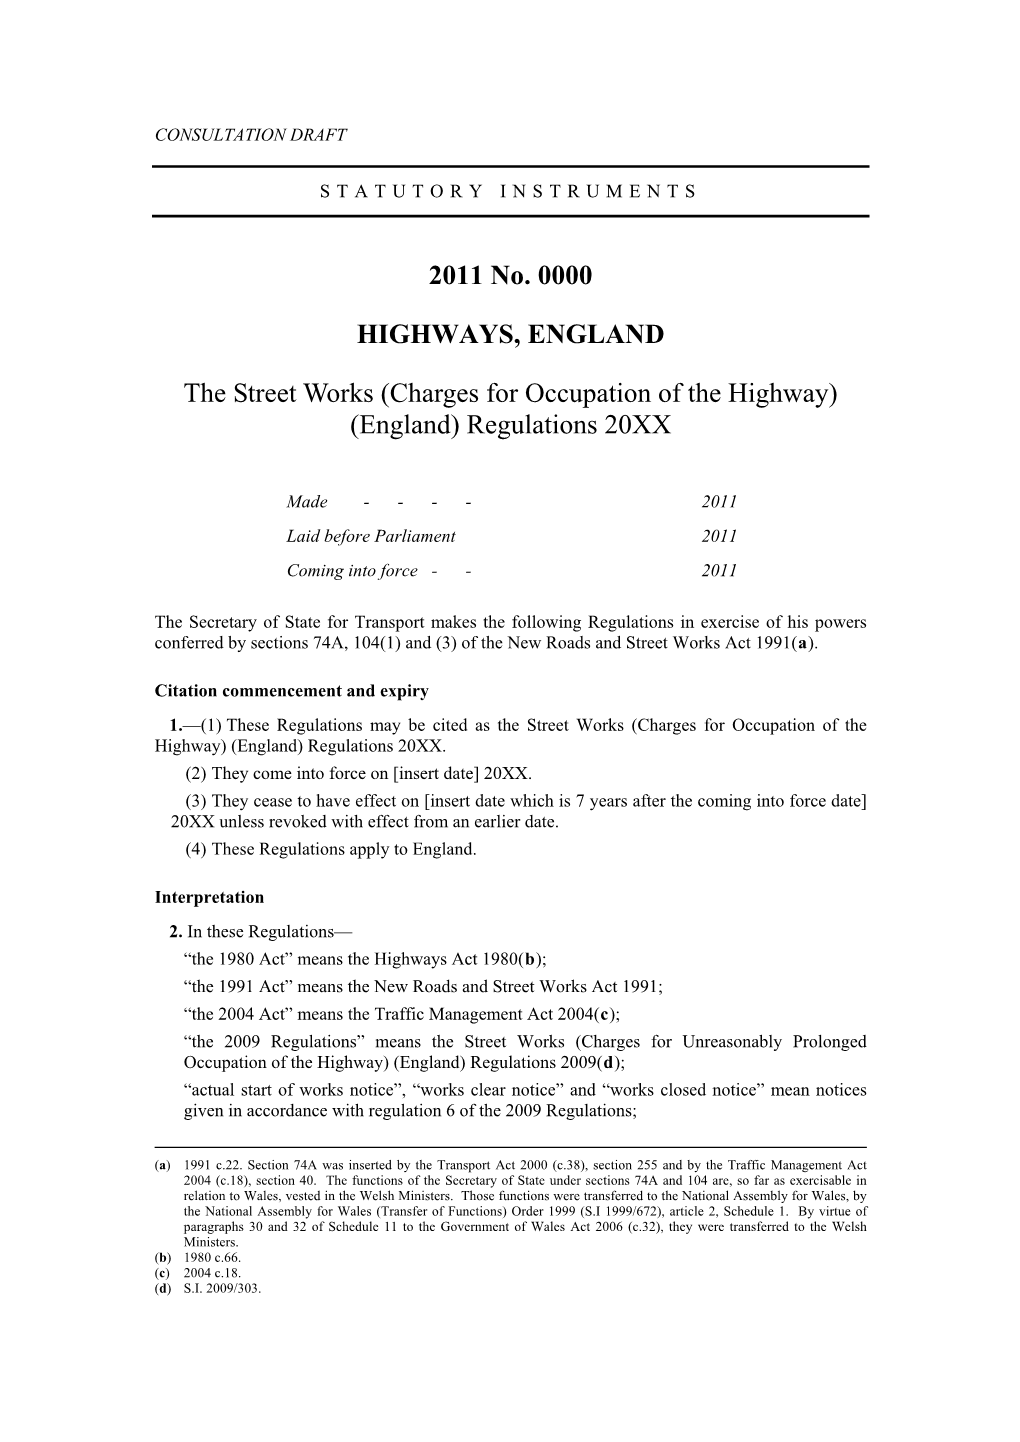 The Street Works (Charges for Occupation of the Highway) (England) Regulations 20XX